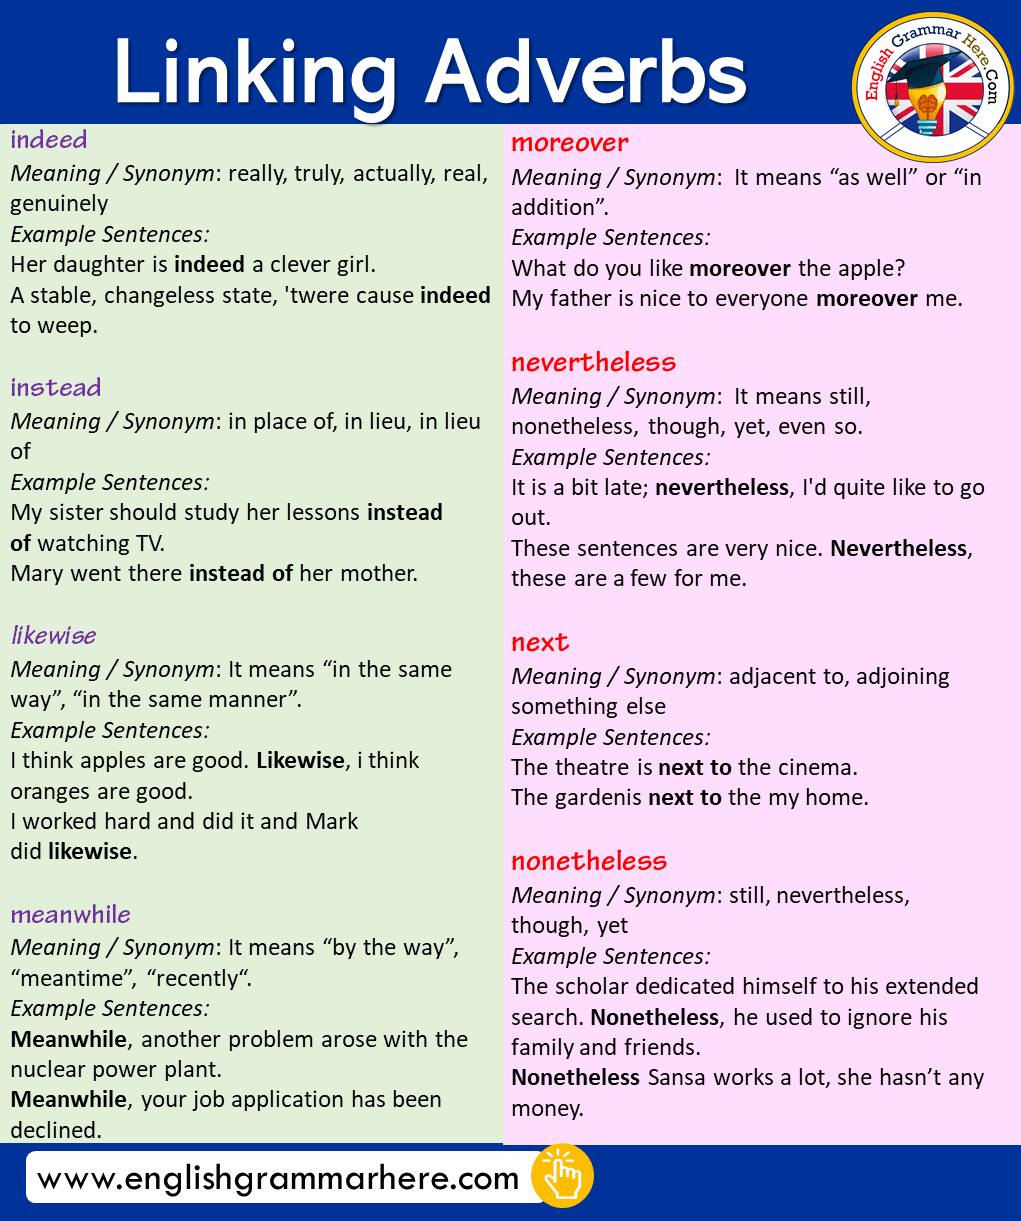 Linking Adverbs, Meanings and Example Sentences